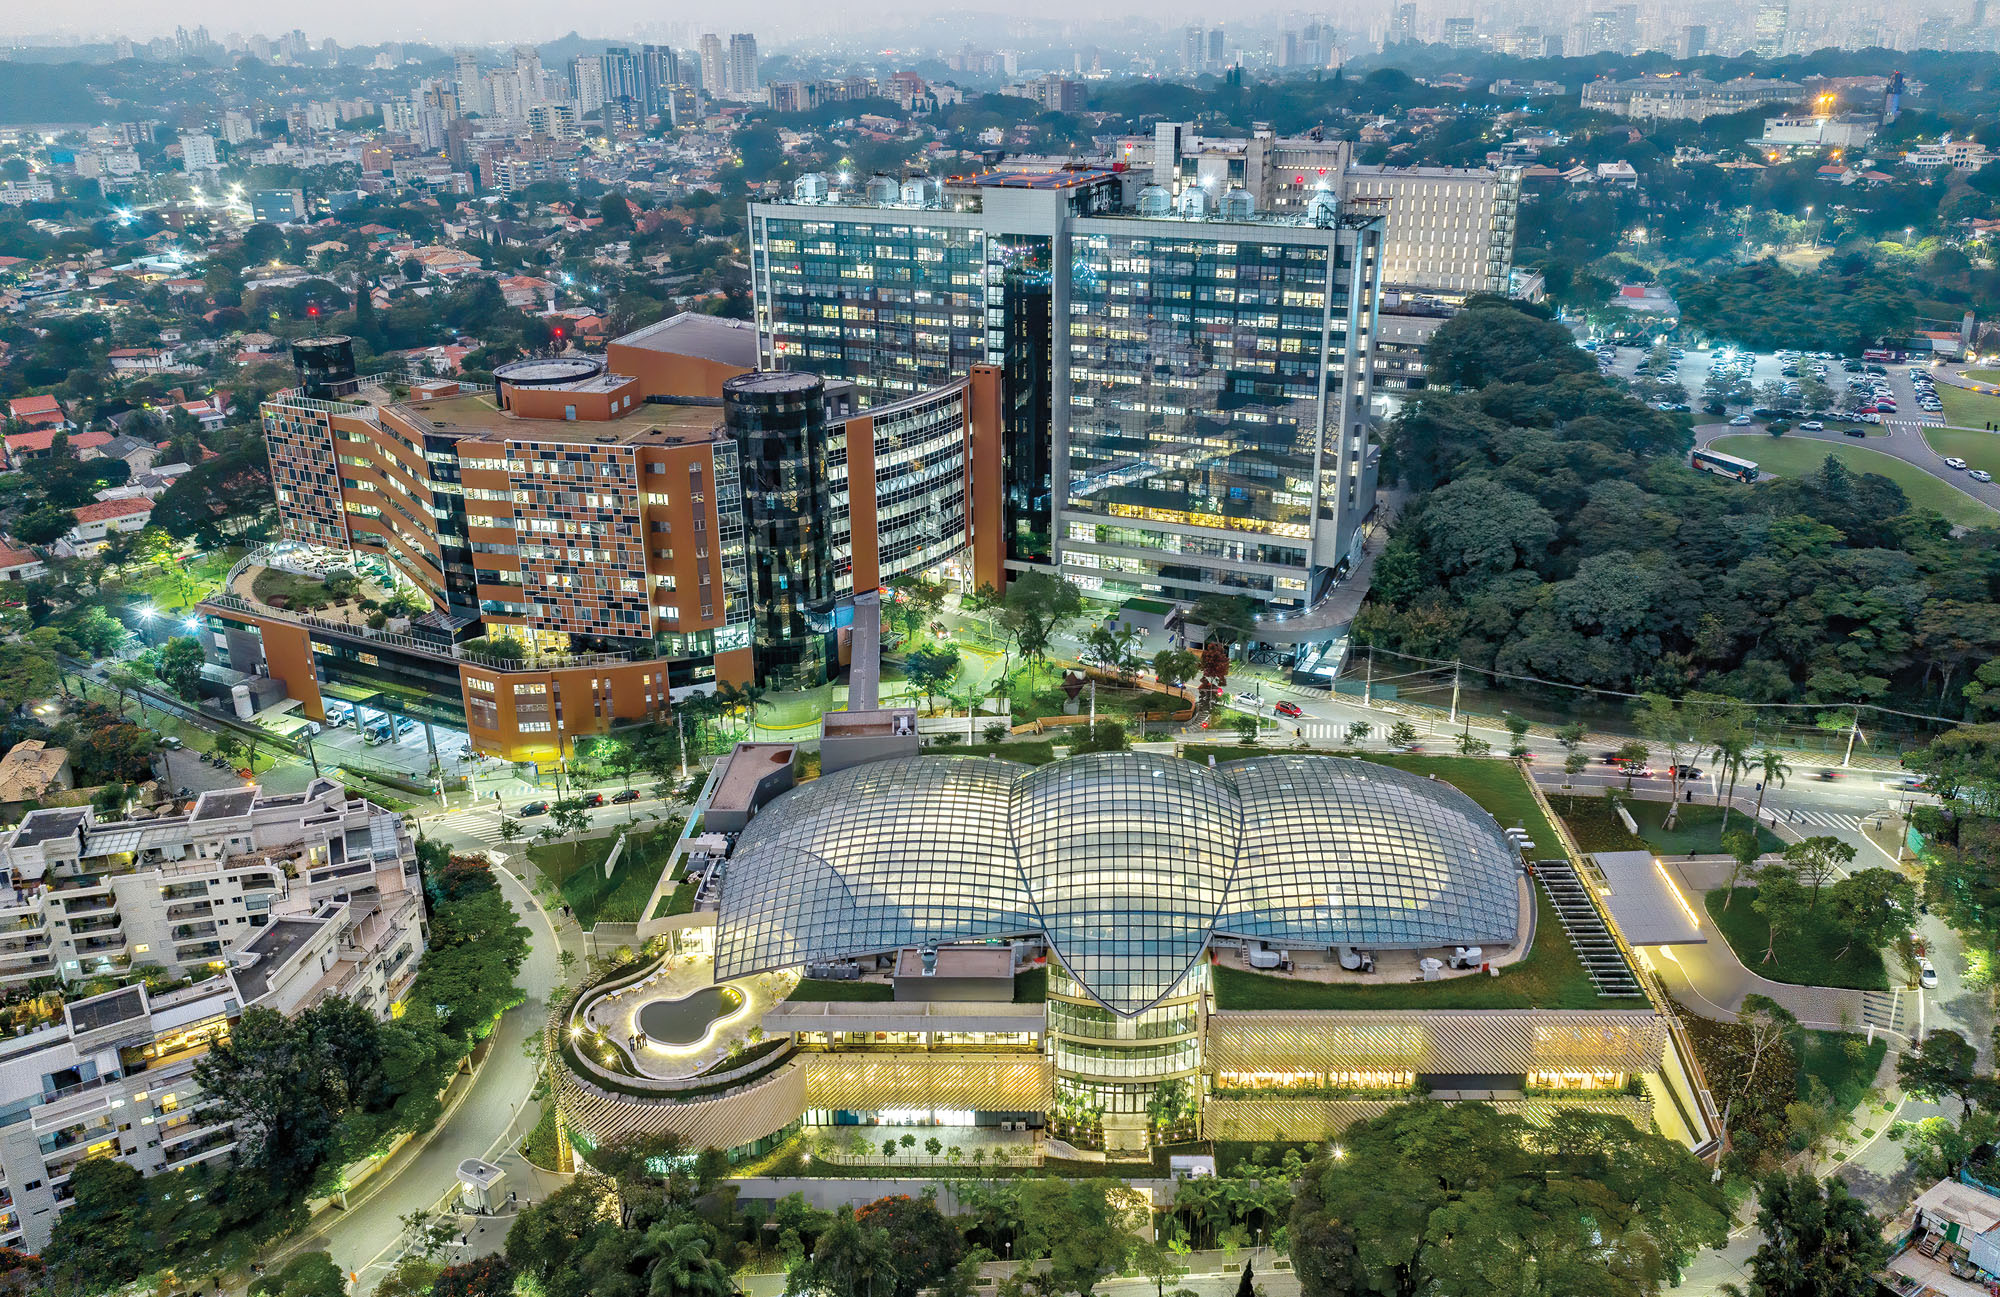 An aerial photograph of the Albert Einstein Education and Research Center designed by Moshe Safdie in Sao Paulo Brazil in the evening, it is illuminated from inside and surrounded by greenery.